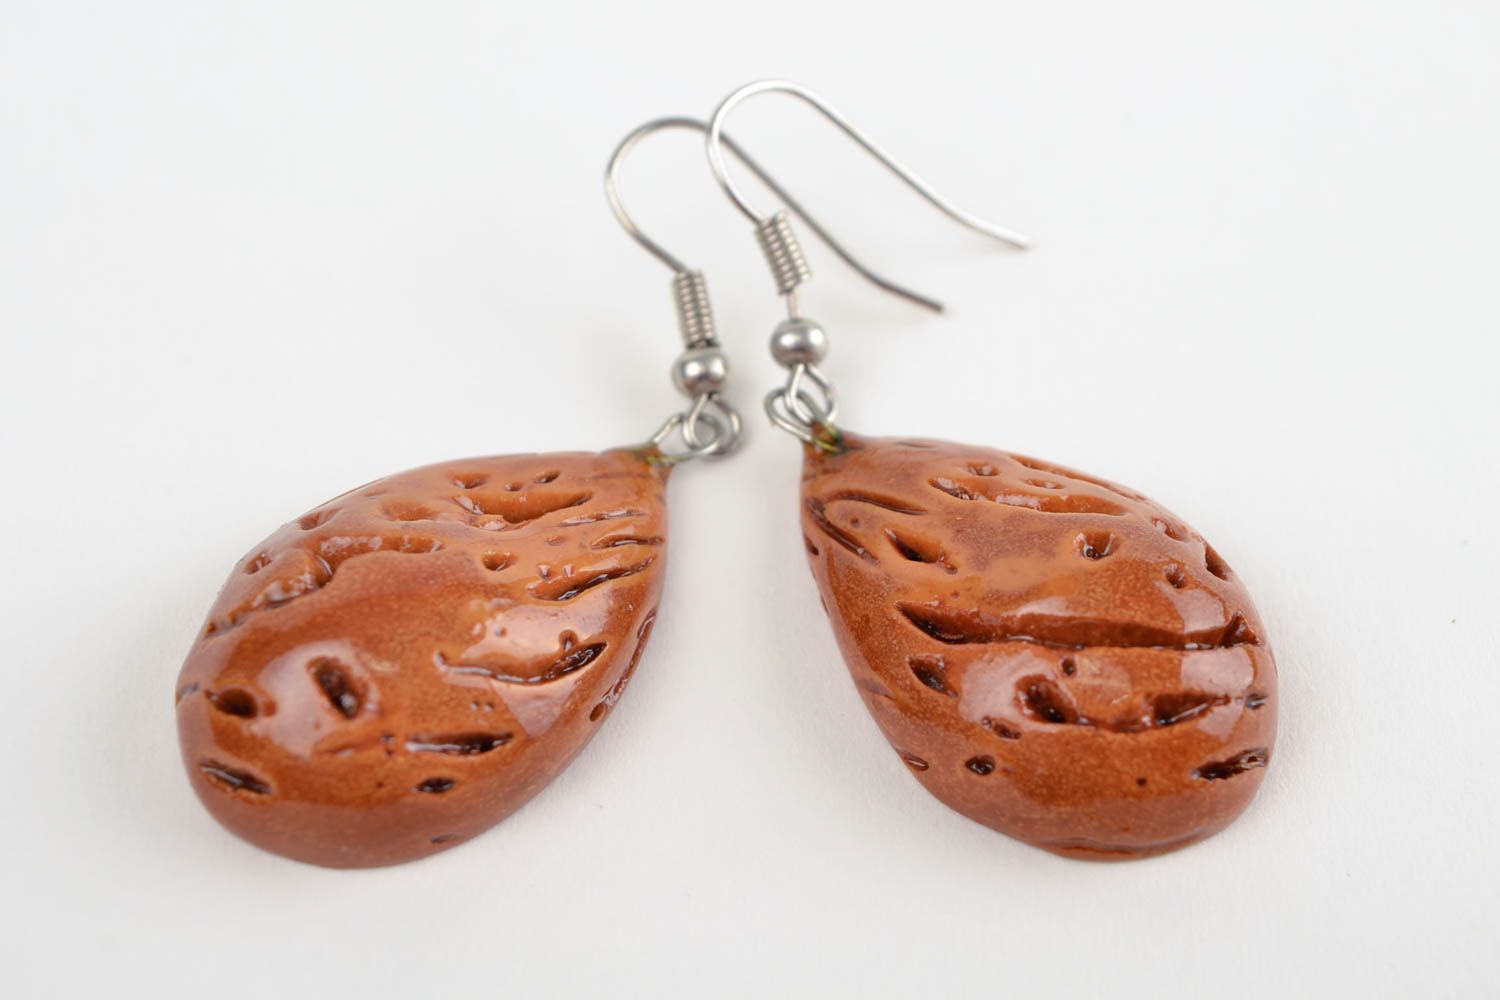 Homemade jewelry designer earrings wooden earrings fashion accessories photo 3